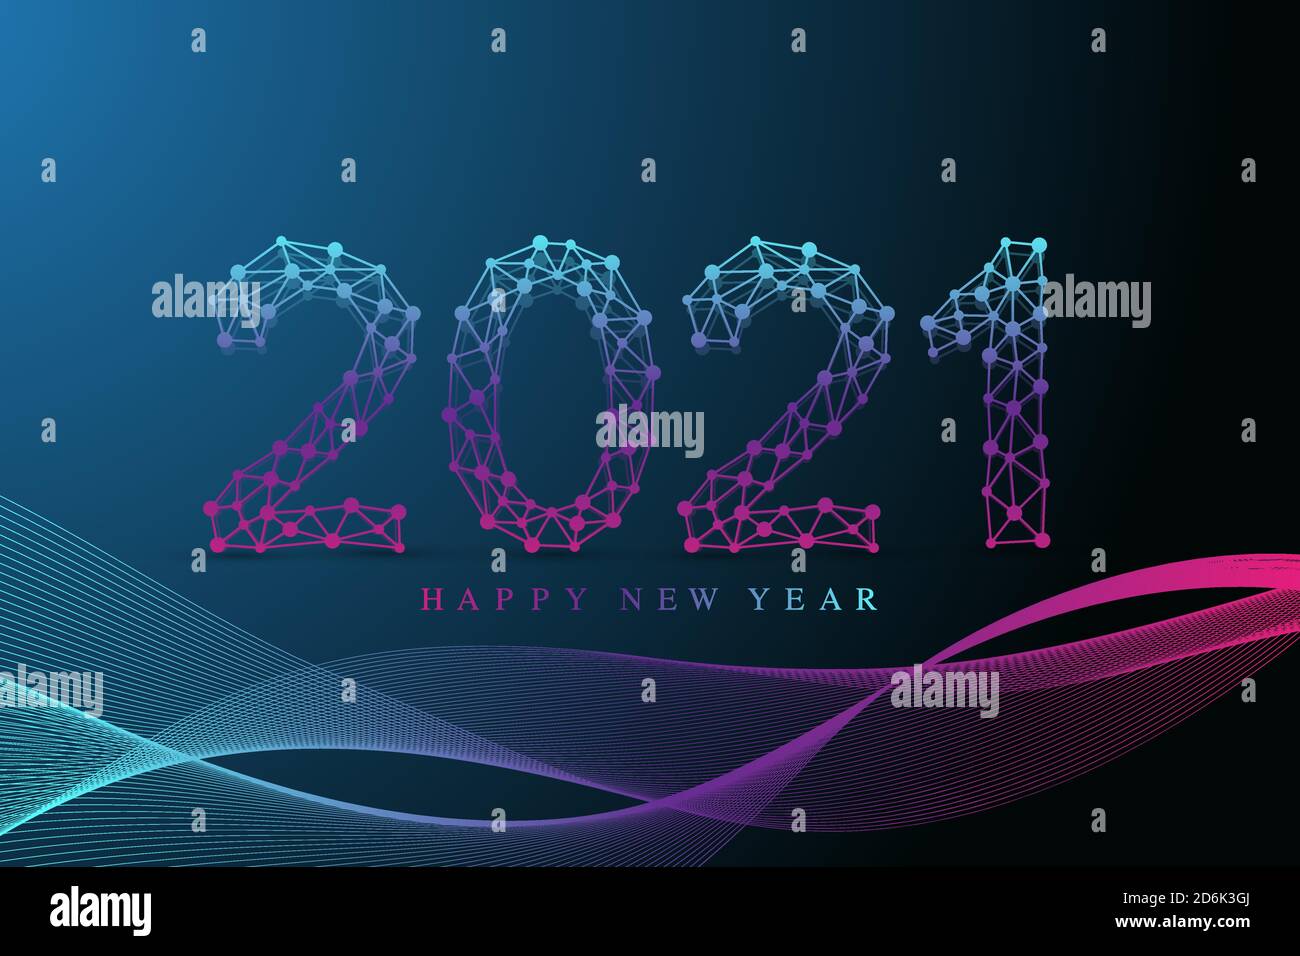 Text design Christmas and Happy new year 2021. Graphic background communication 2021. Connected lines with dots. Design for presentation, flyer Stock Vector